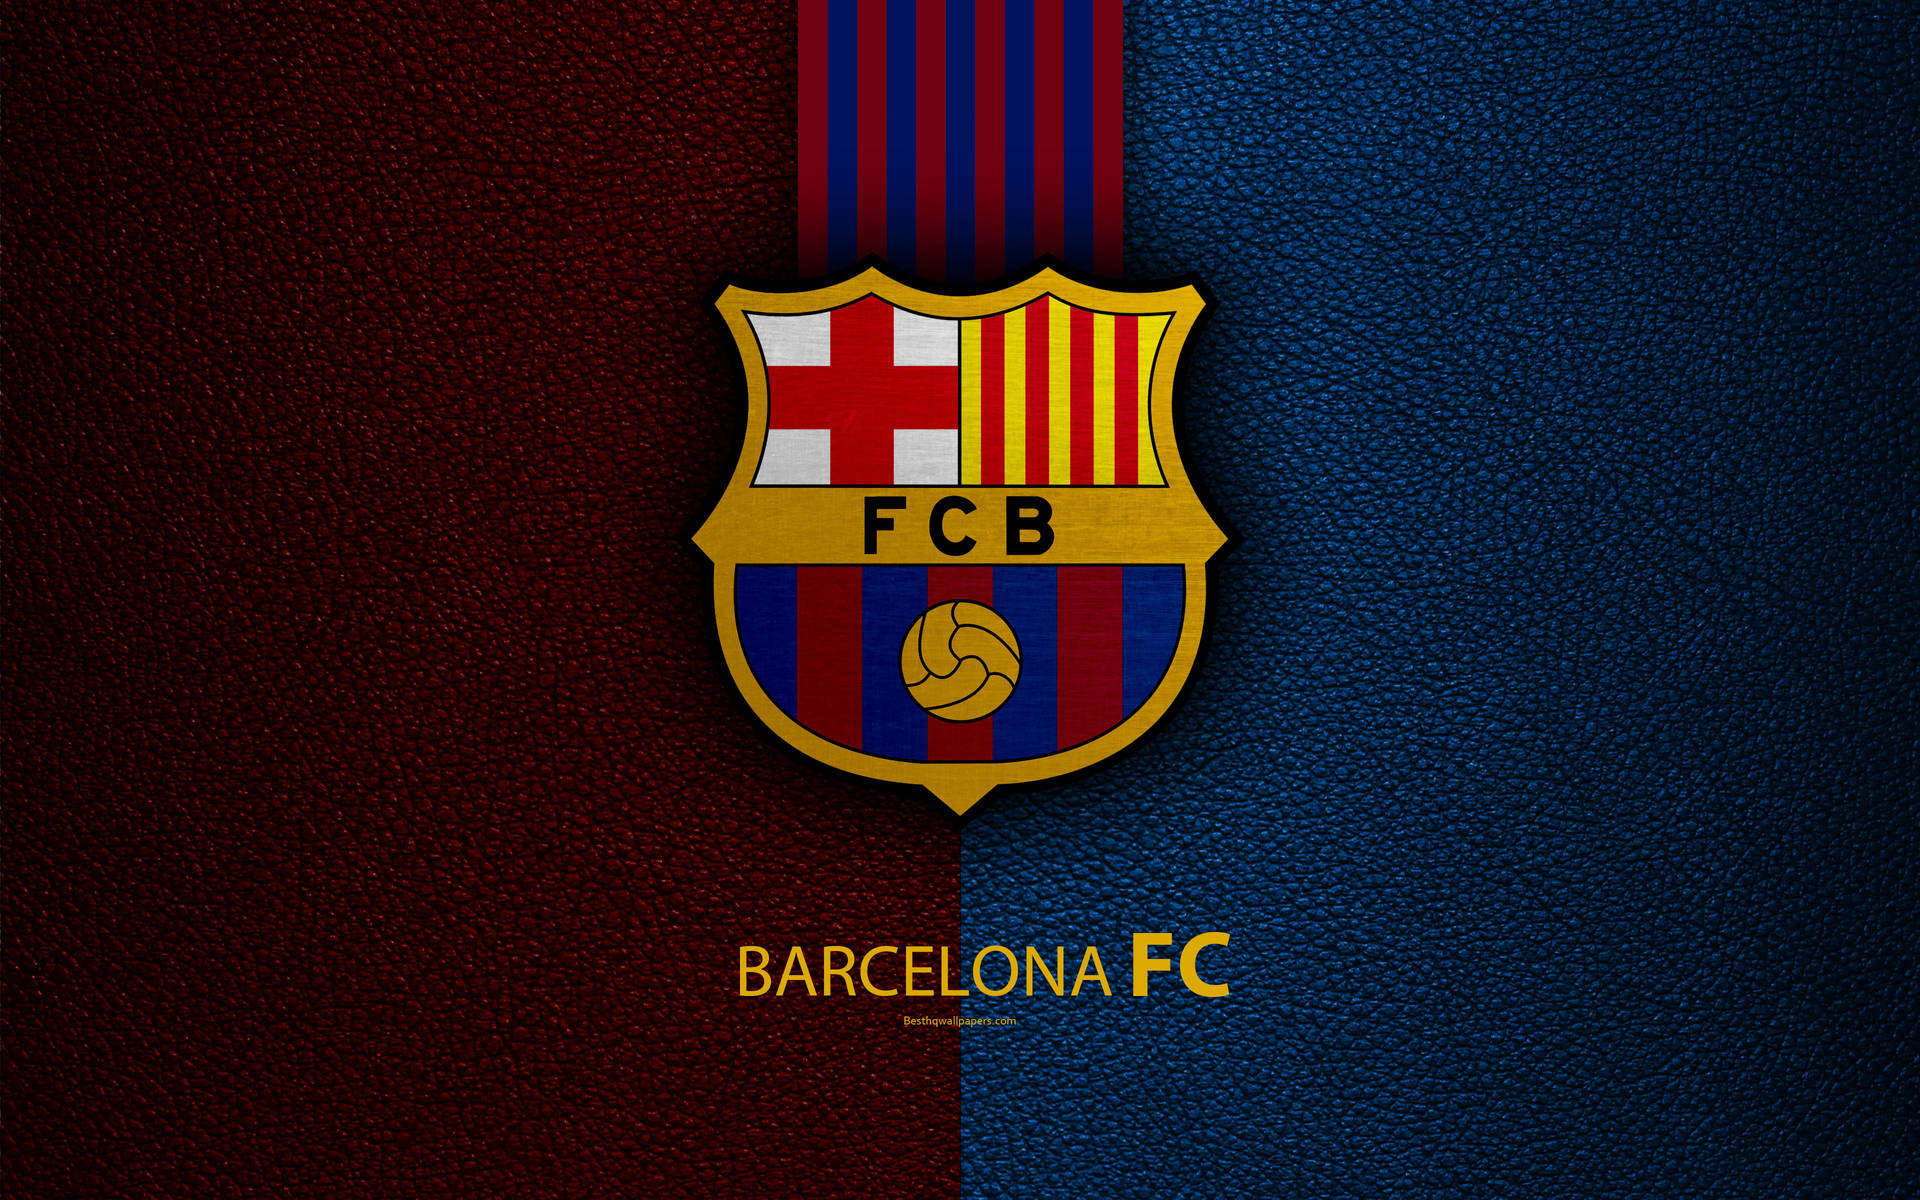 Barcelona Fc Logo Leather Texture Background